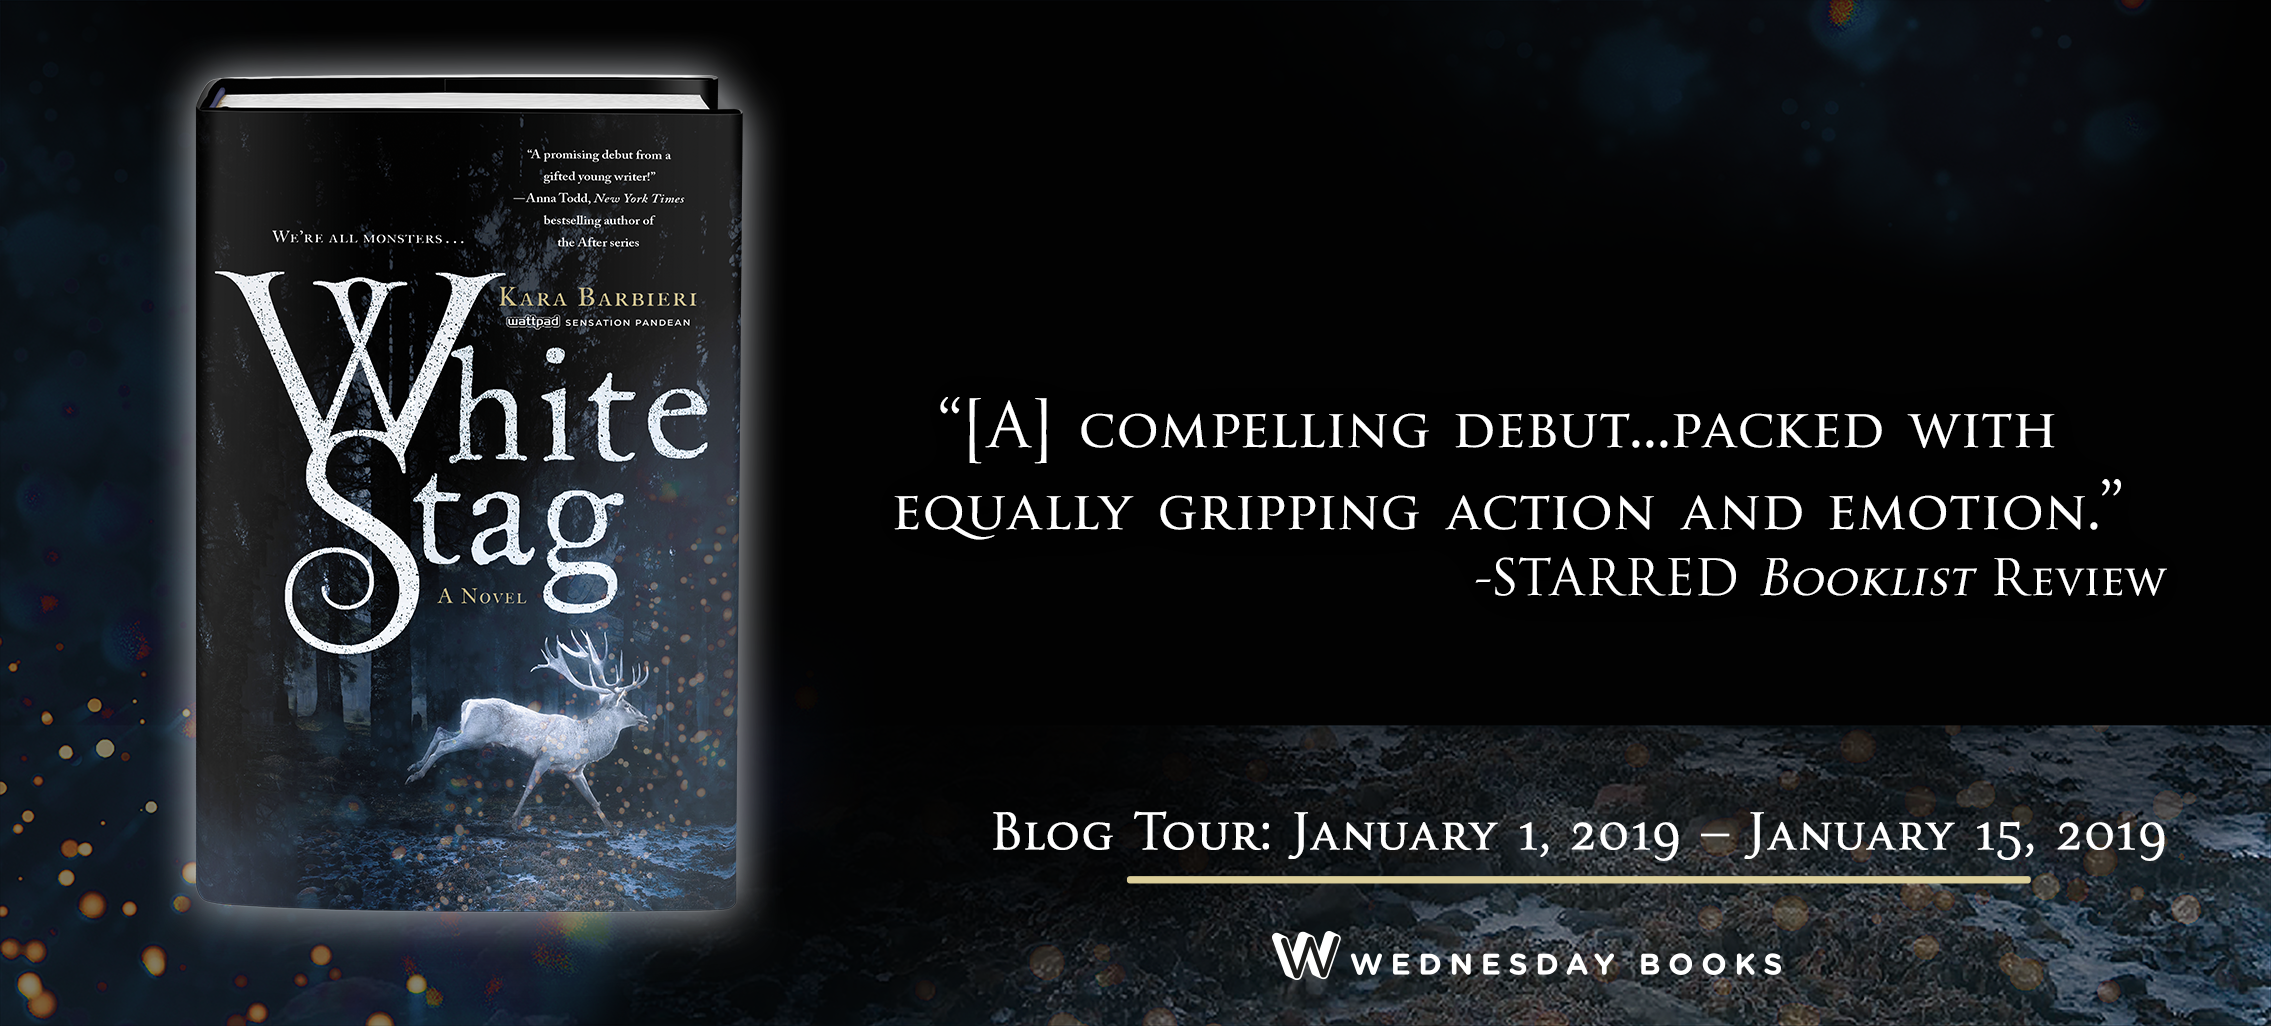 White Stag Blog Tour Banner.png